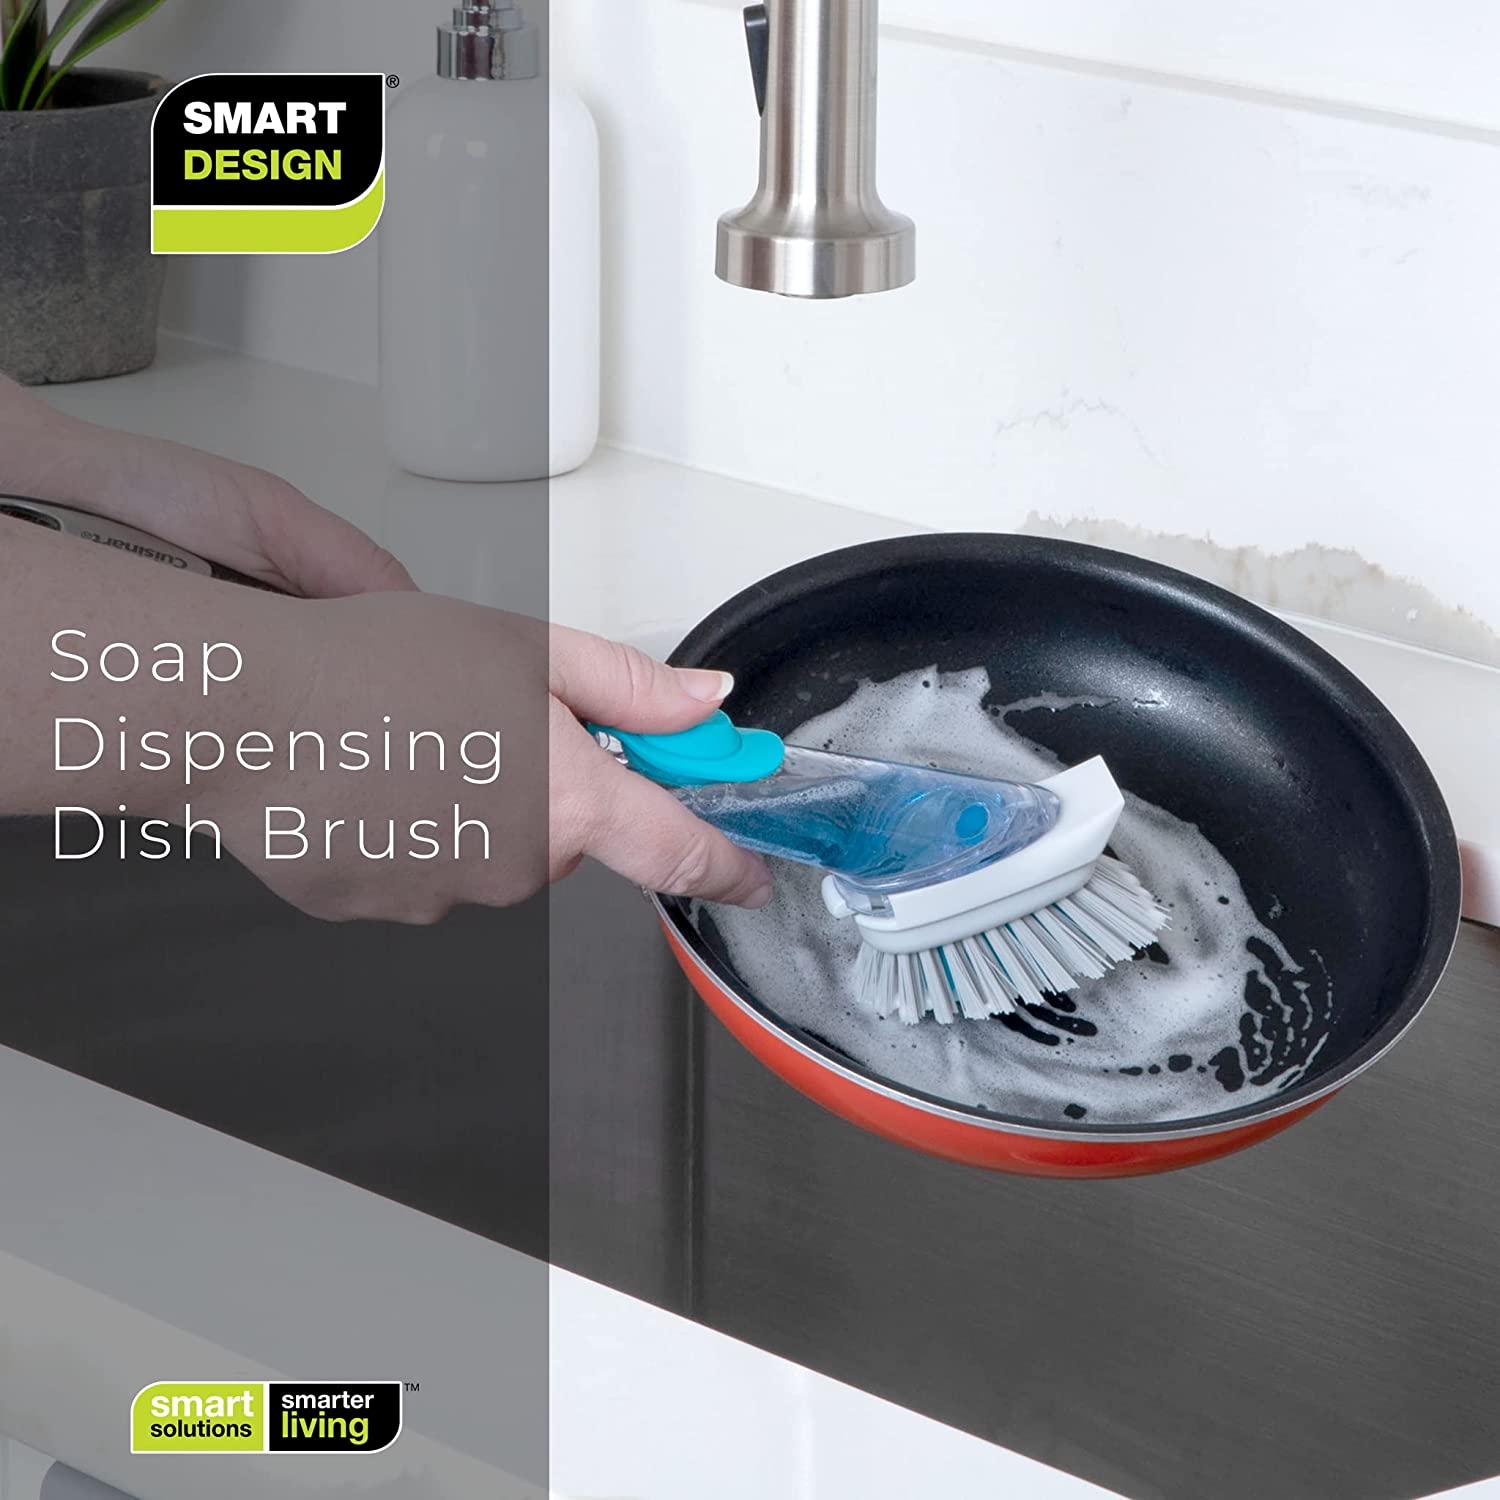 Smart Design Soap Dispensing Dish Brush with Replaceable Head